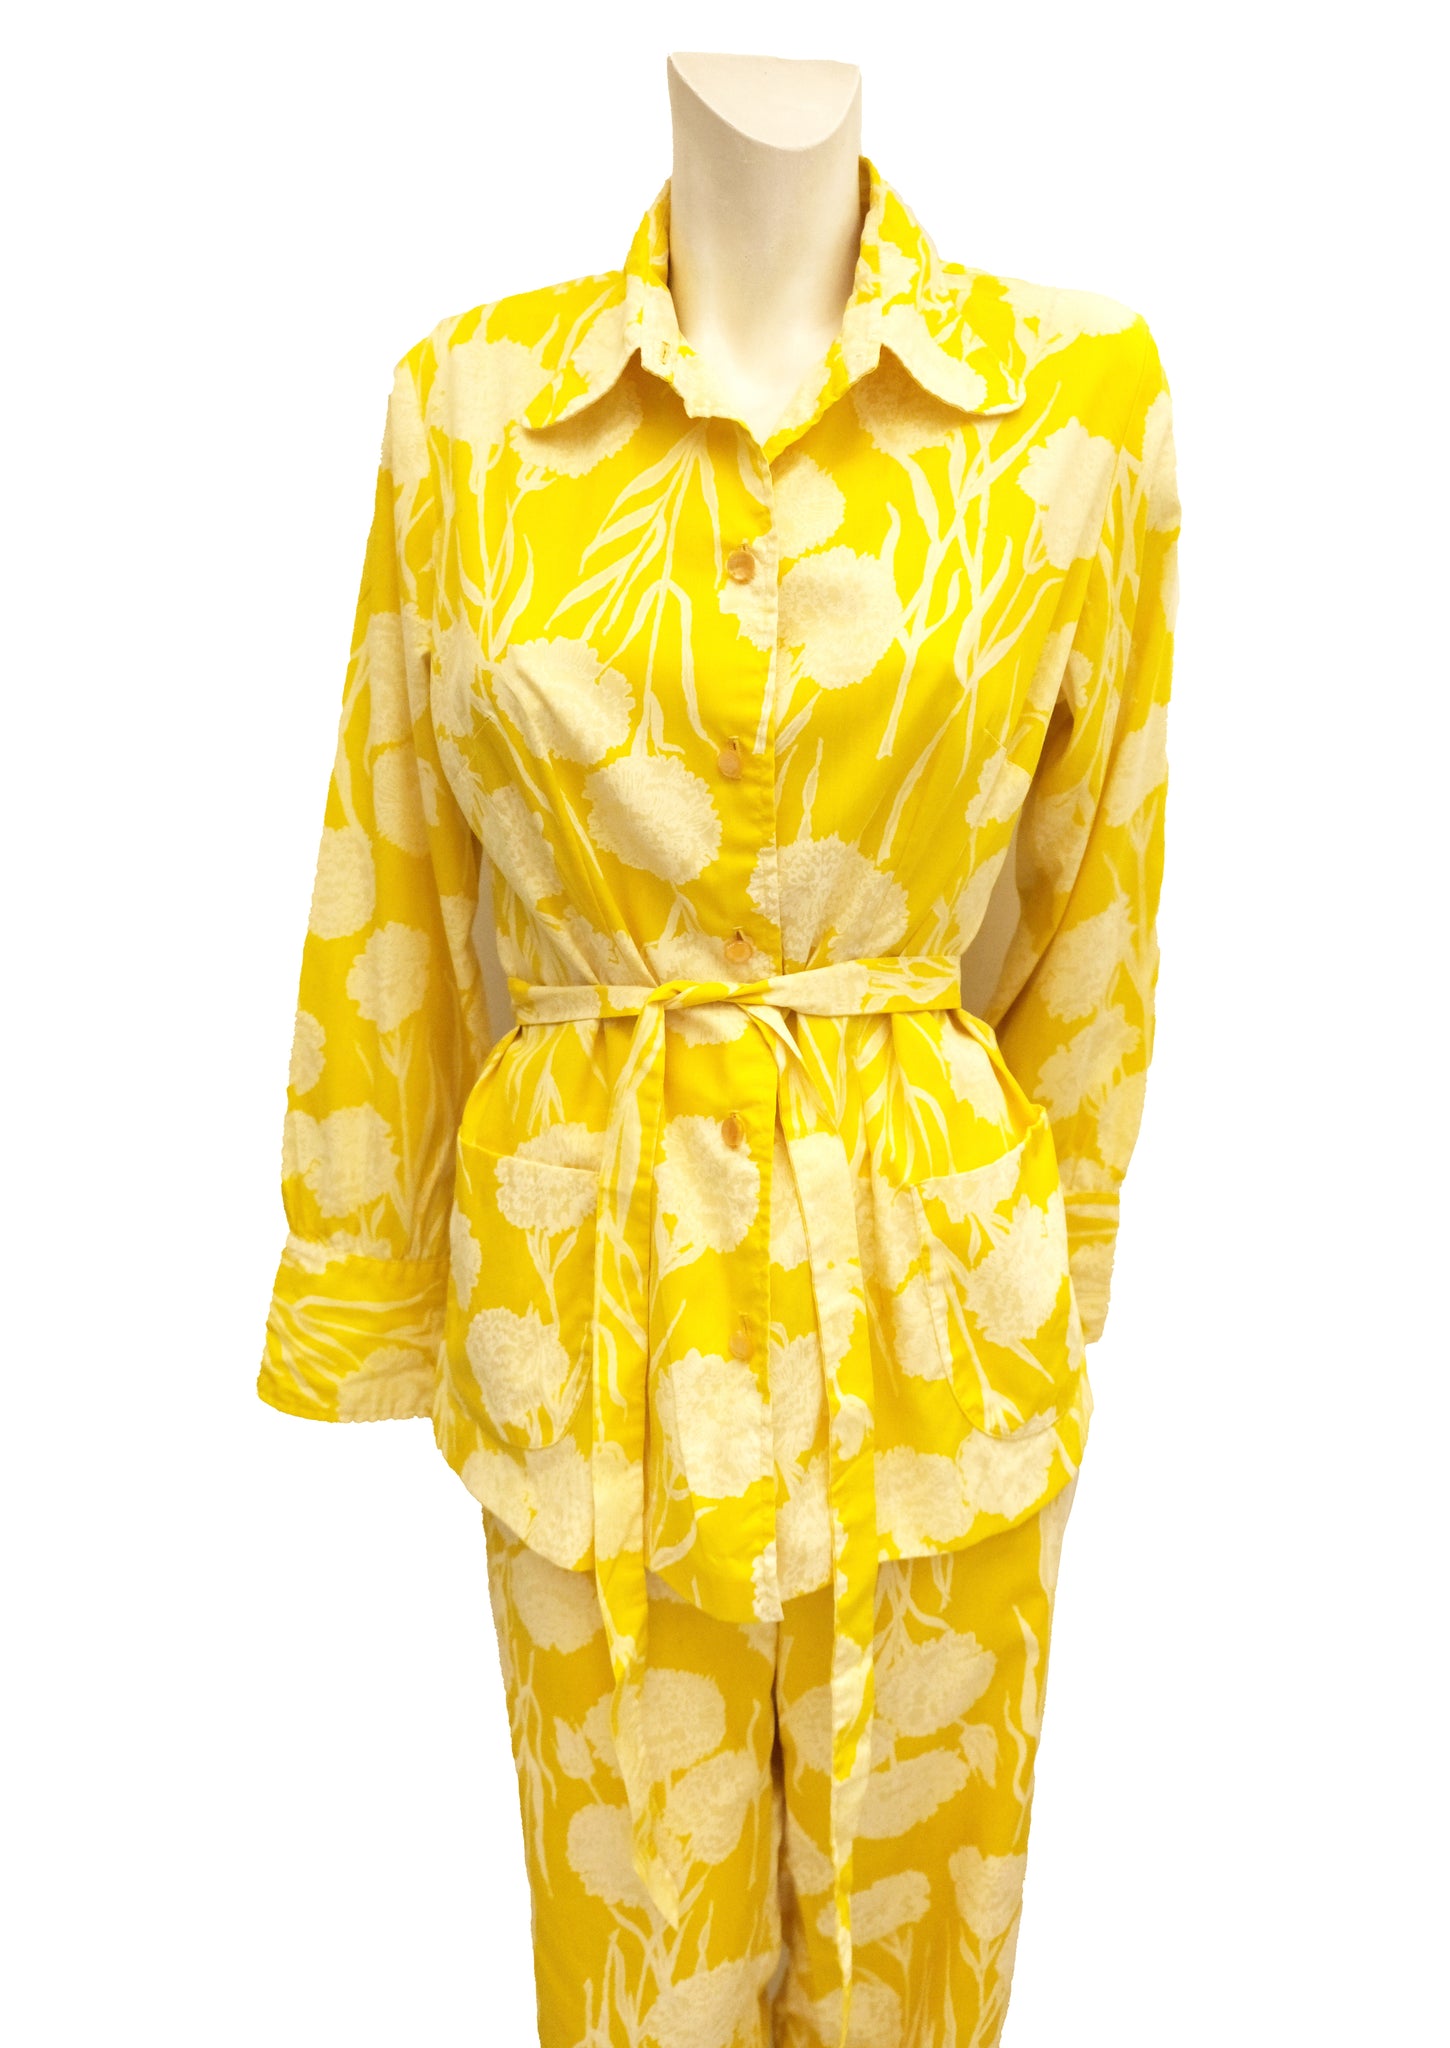 Lilly Pulitzer Bright Yellow Floral Pyjama Lounge Suit, UK12-14 ...